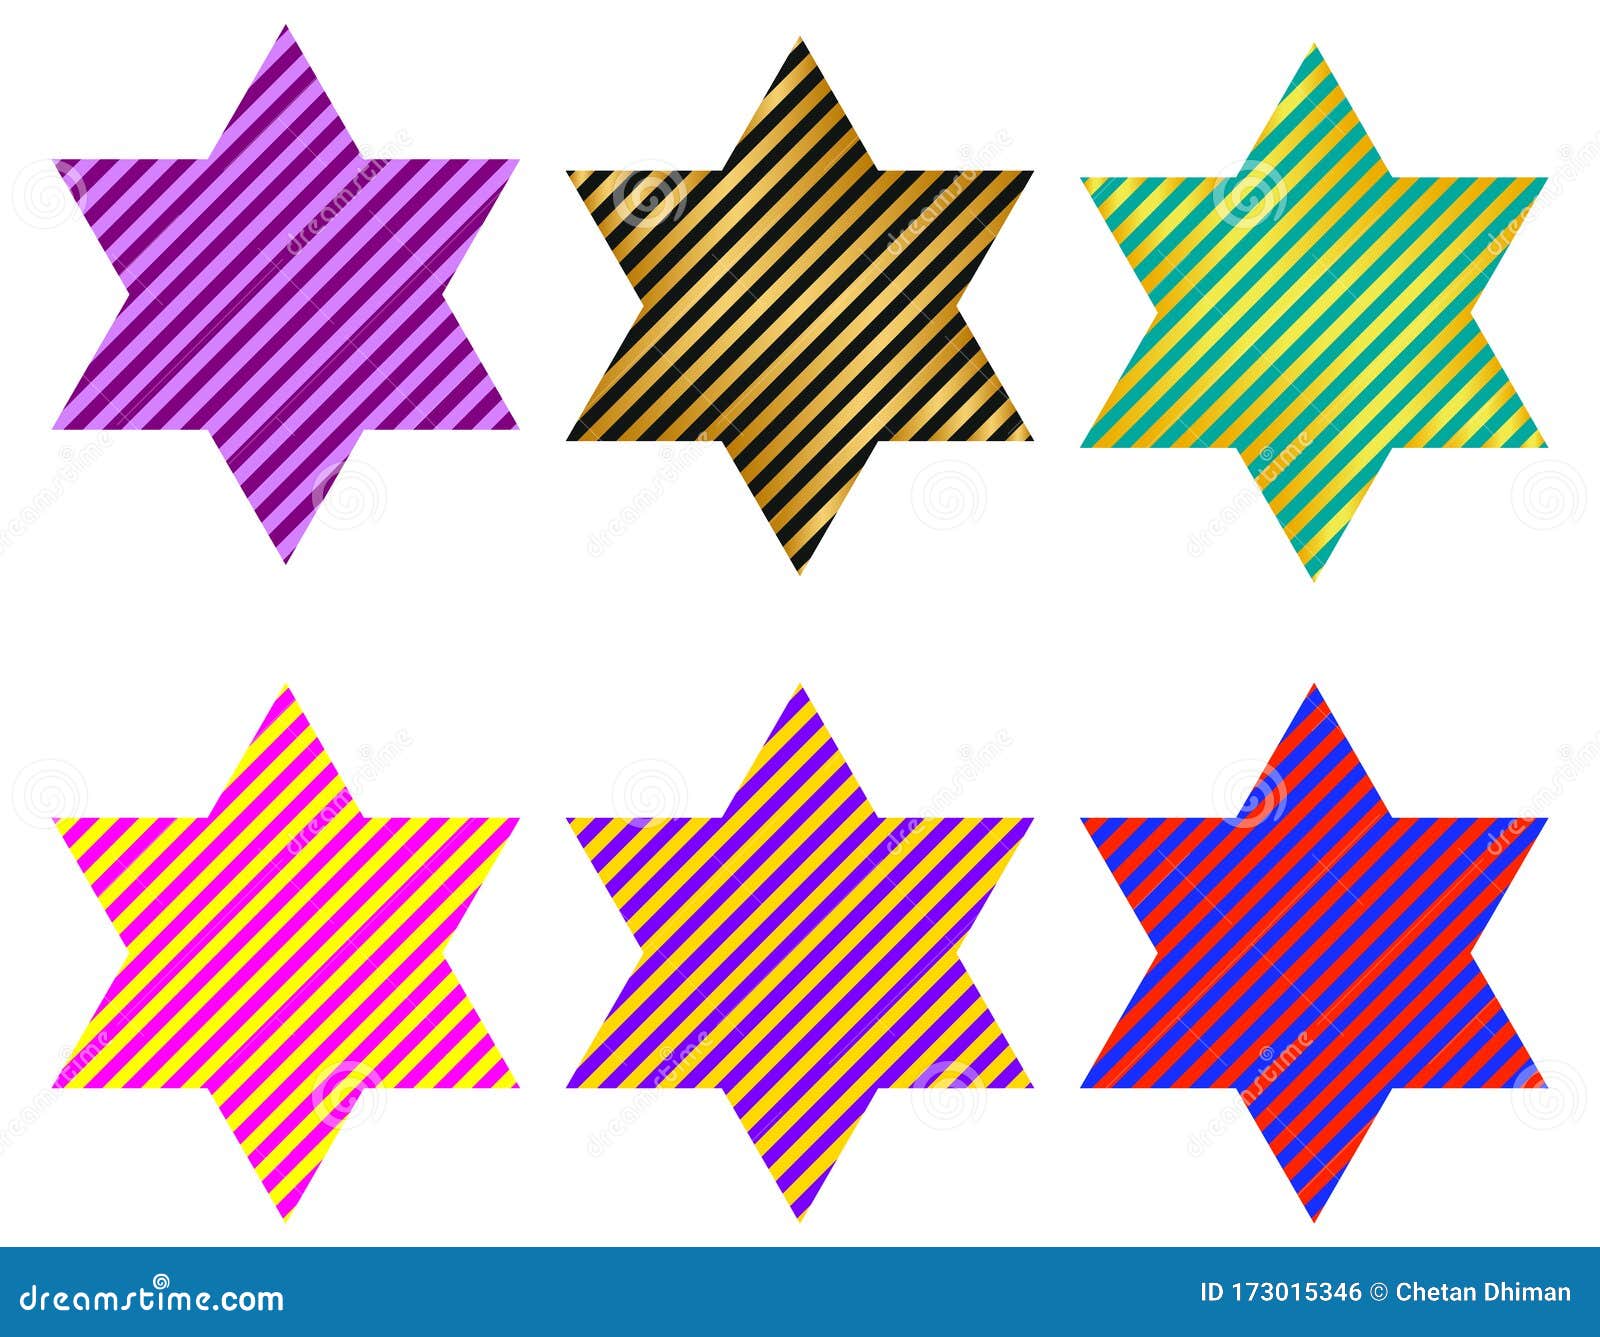 striped stars with six points or hexagram in different colors